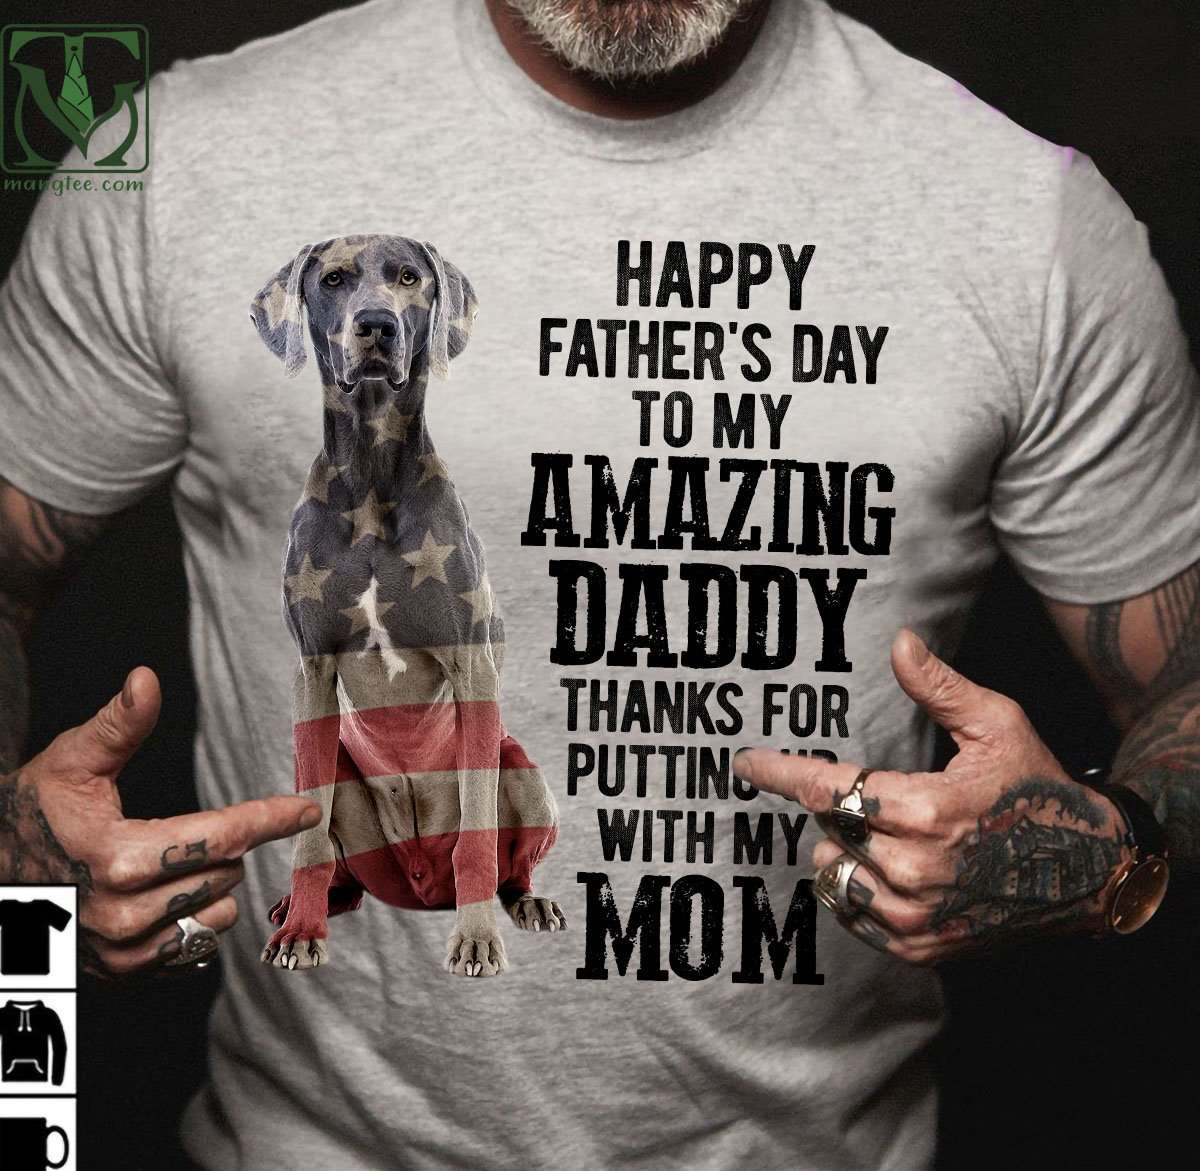 Happy father's day to my amazing daddy thanks for putting up with my mom - weimaraner black dad